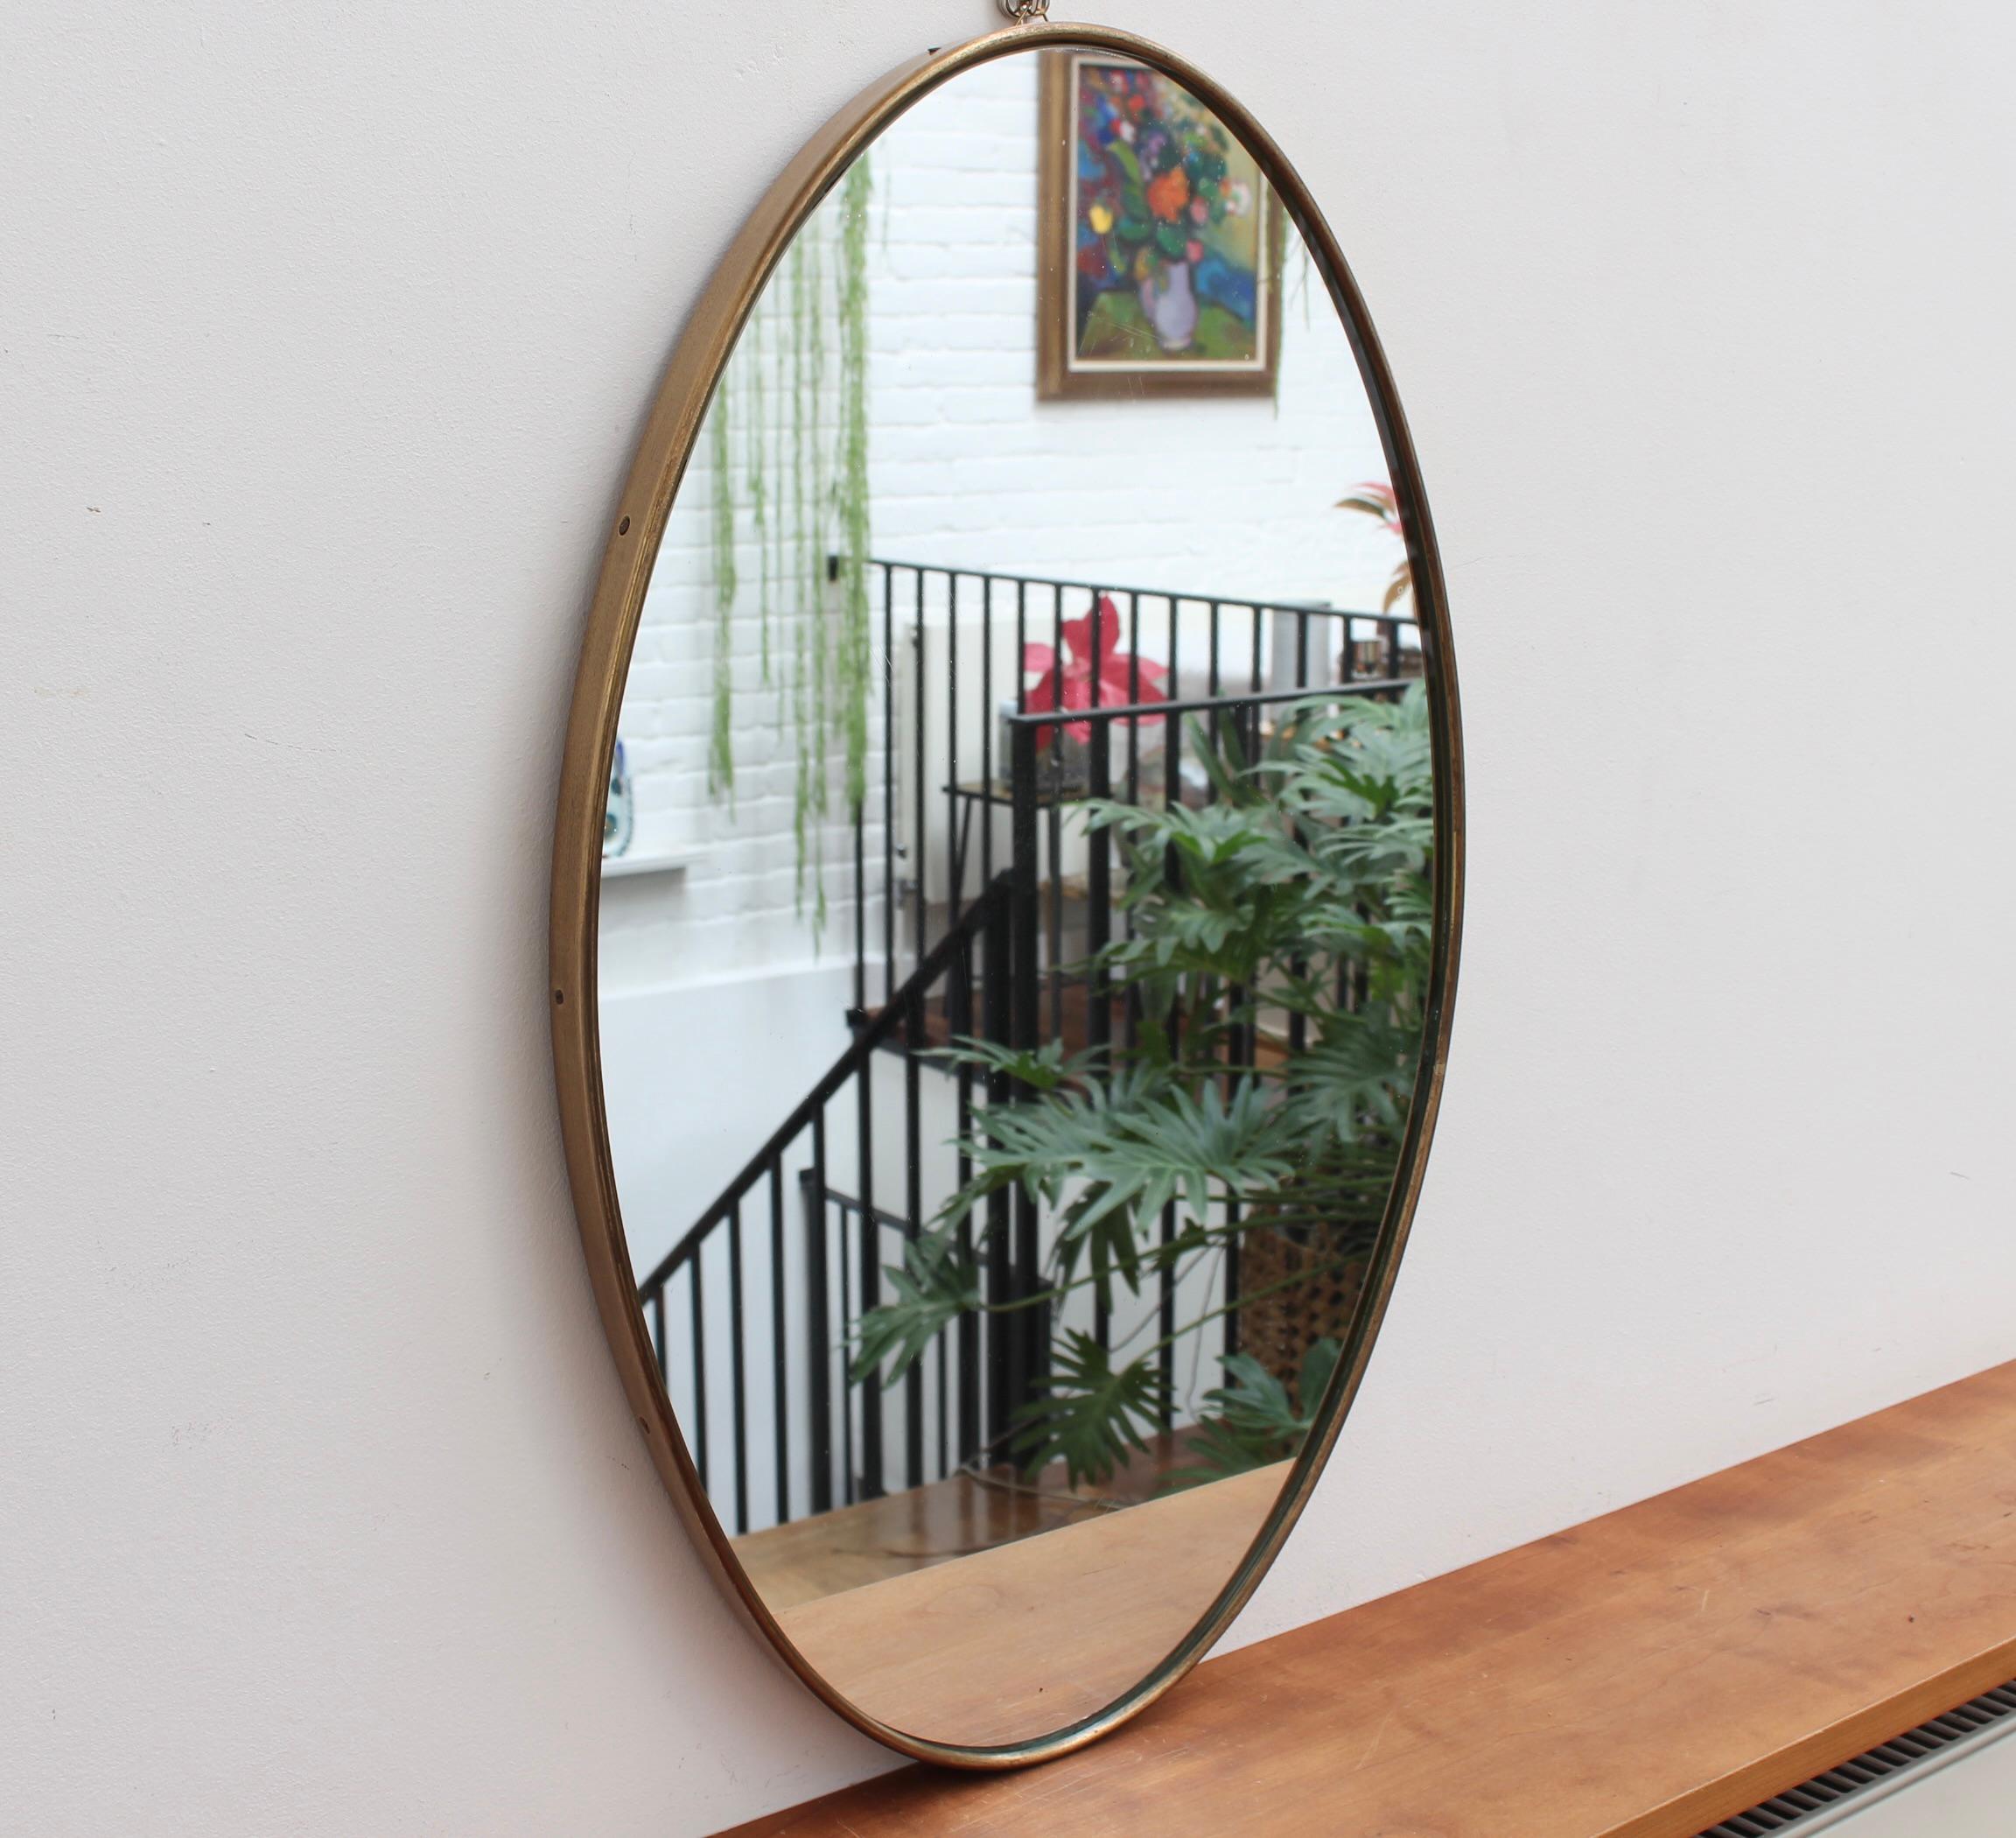 Mid-century Italian wall mirror with brass frame (circa 1950s). The mirror is oval in shape and very smart, with irresistible durability. The visual impression is elegant and very distinctive in a modern Gio Ponti style. The mirror is in overall